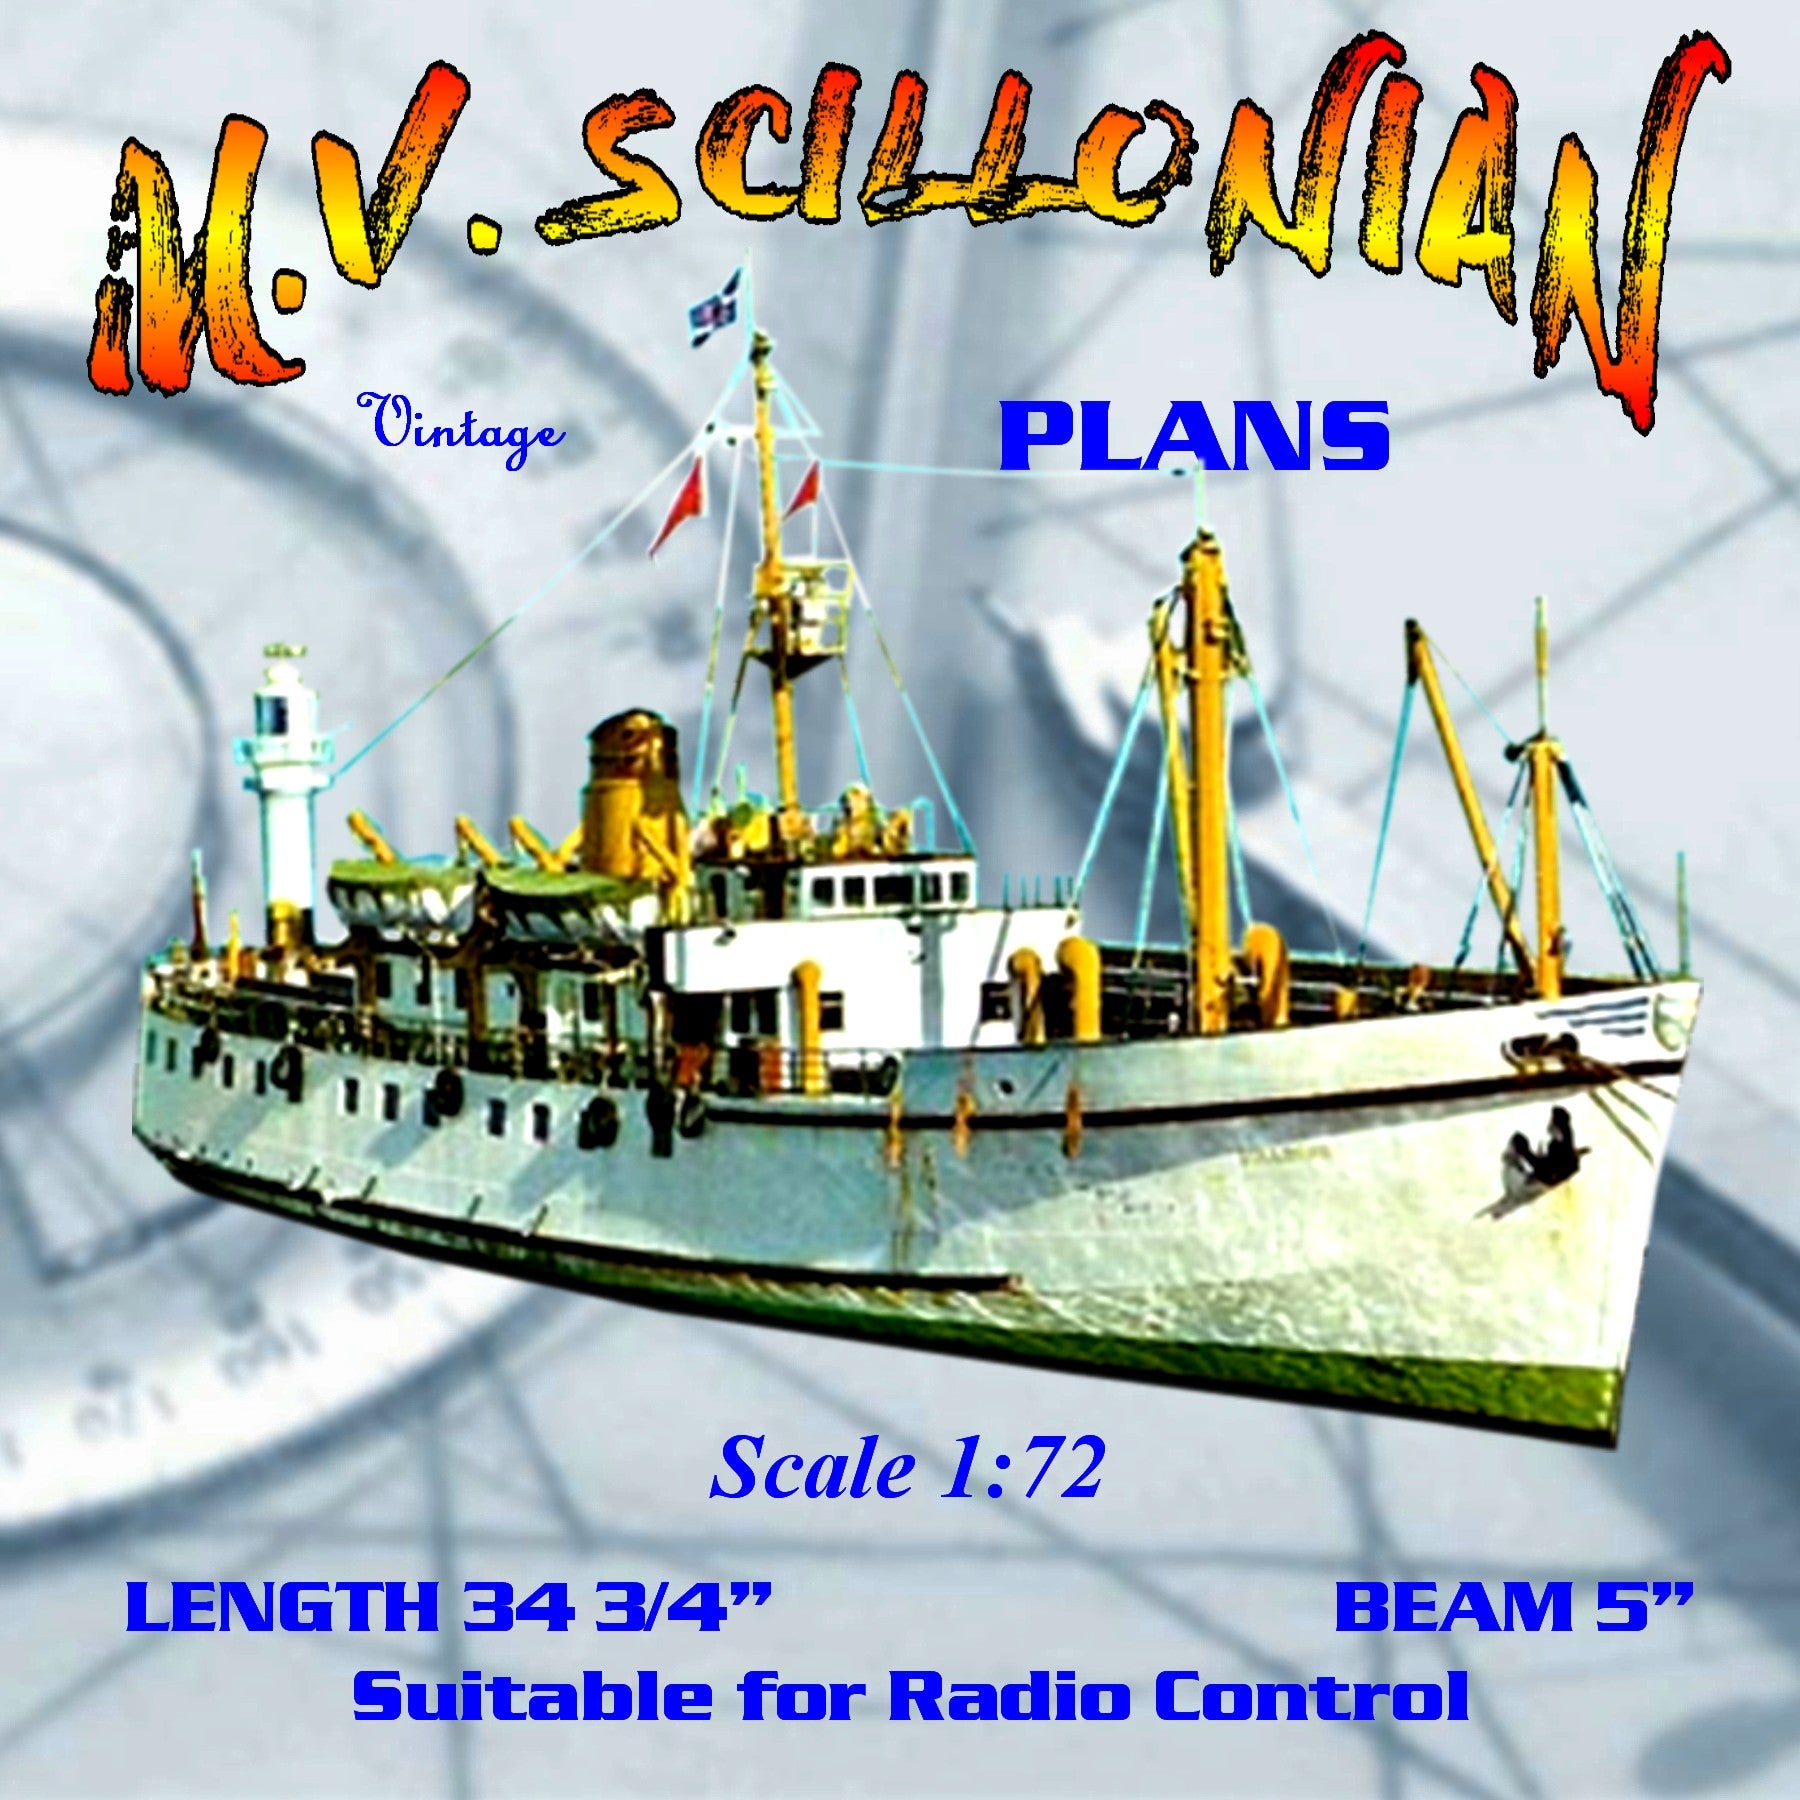 full size printed plans passenger ferry m.v. scillonian scale 1:72 suitable for radio control